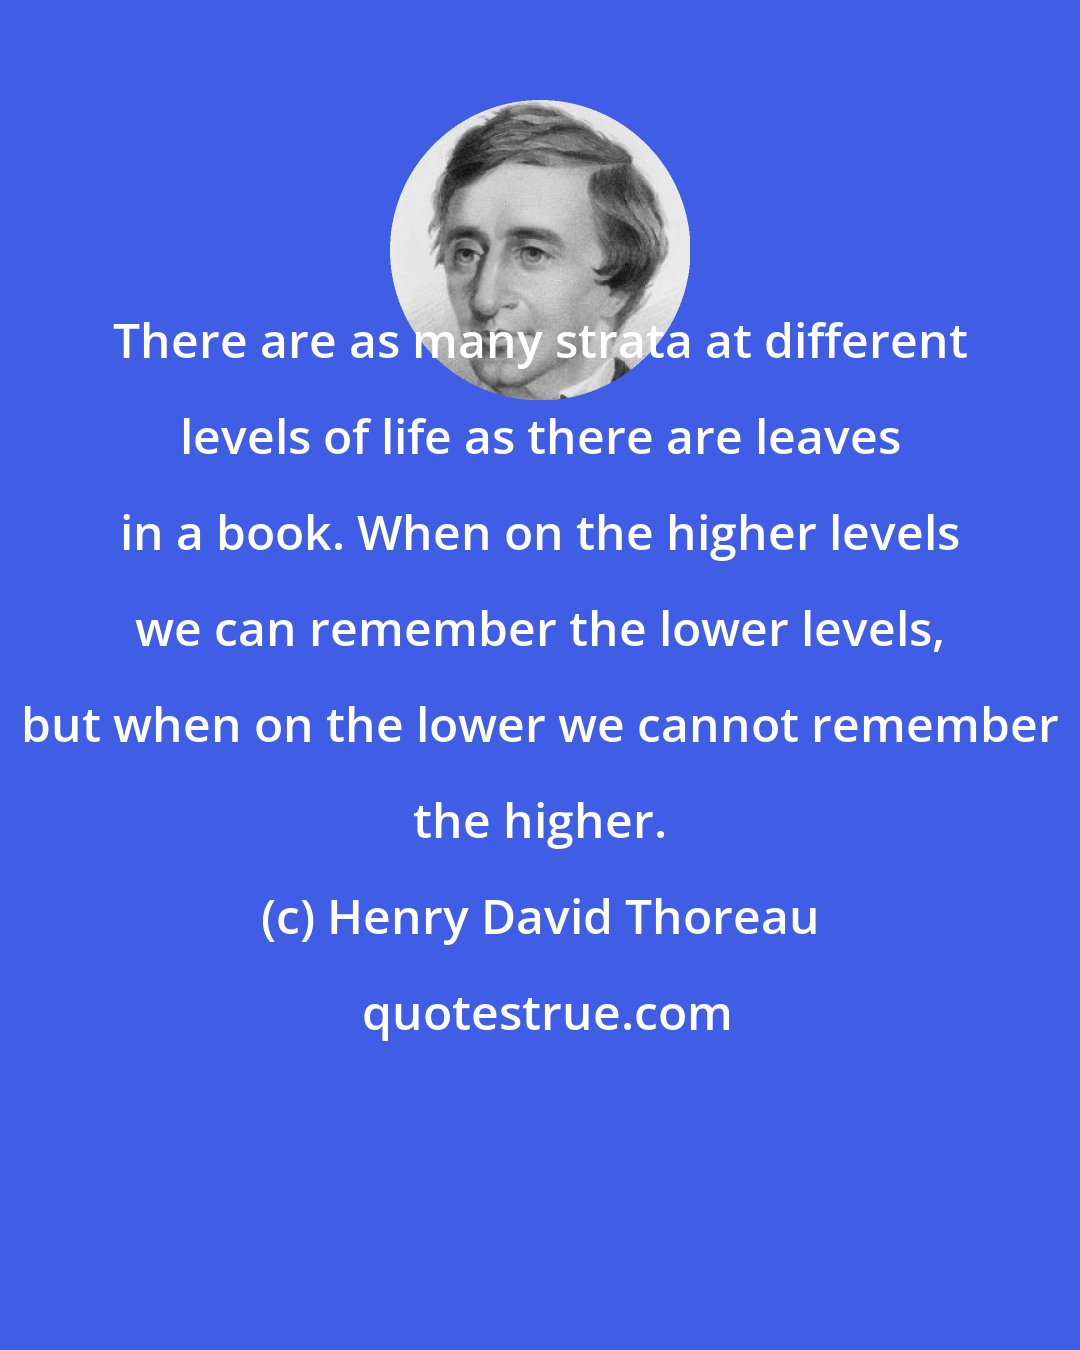 Henry David Thoreau: There are as many strata at different levels of life as there are leaves in a book. When on the higher levels we can remember the lower levels, but when on the lower we cannot remember the higher.